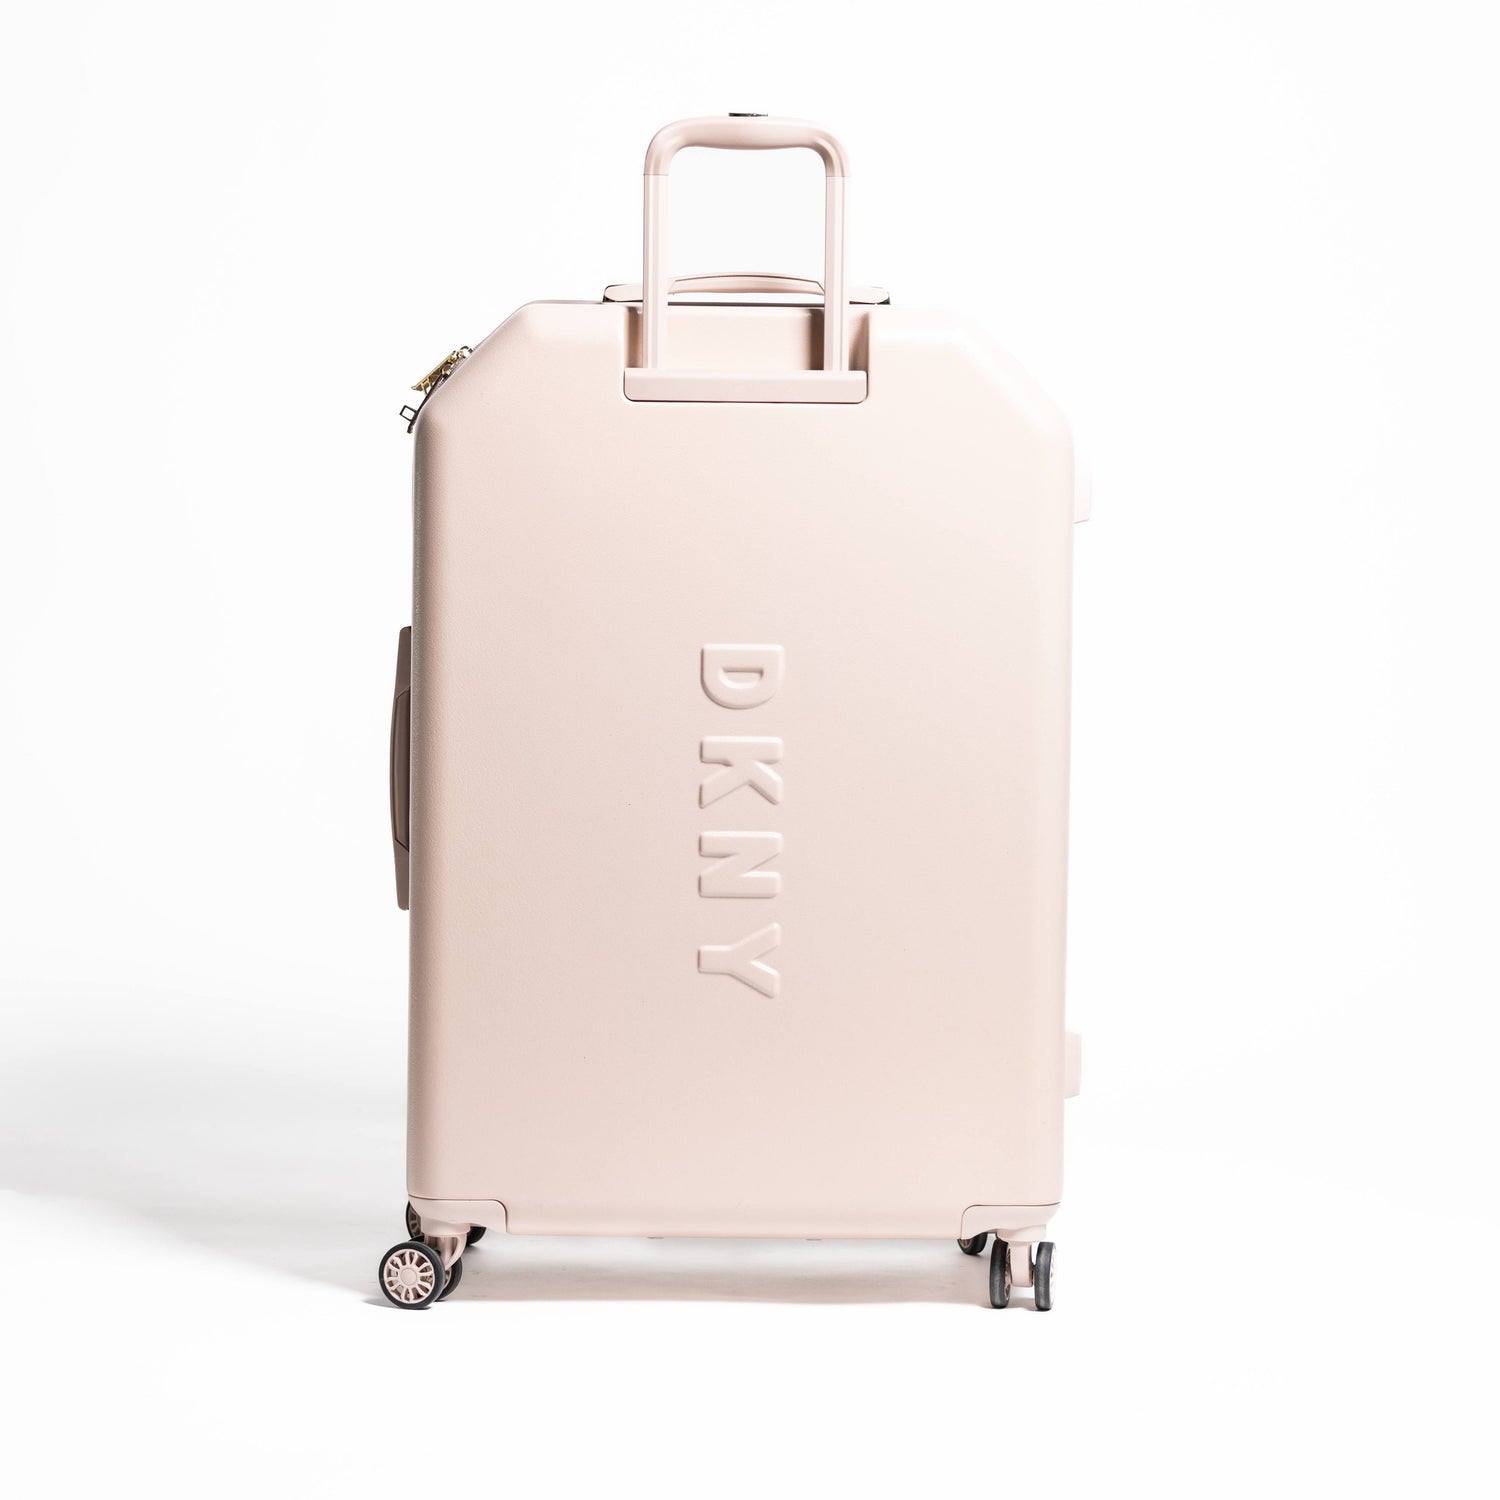 DKNY Champagne Large Luggage_DH818ML7_CHP_03